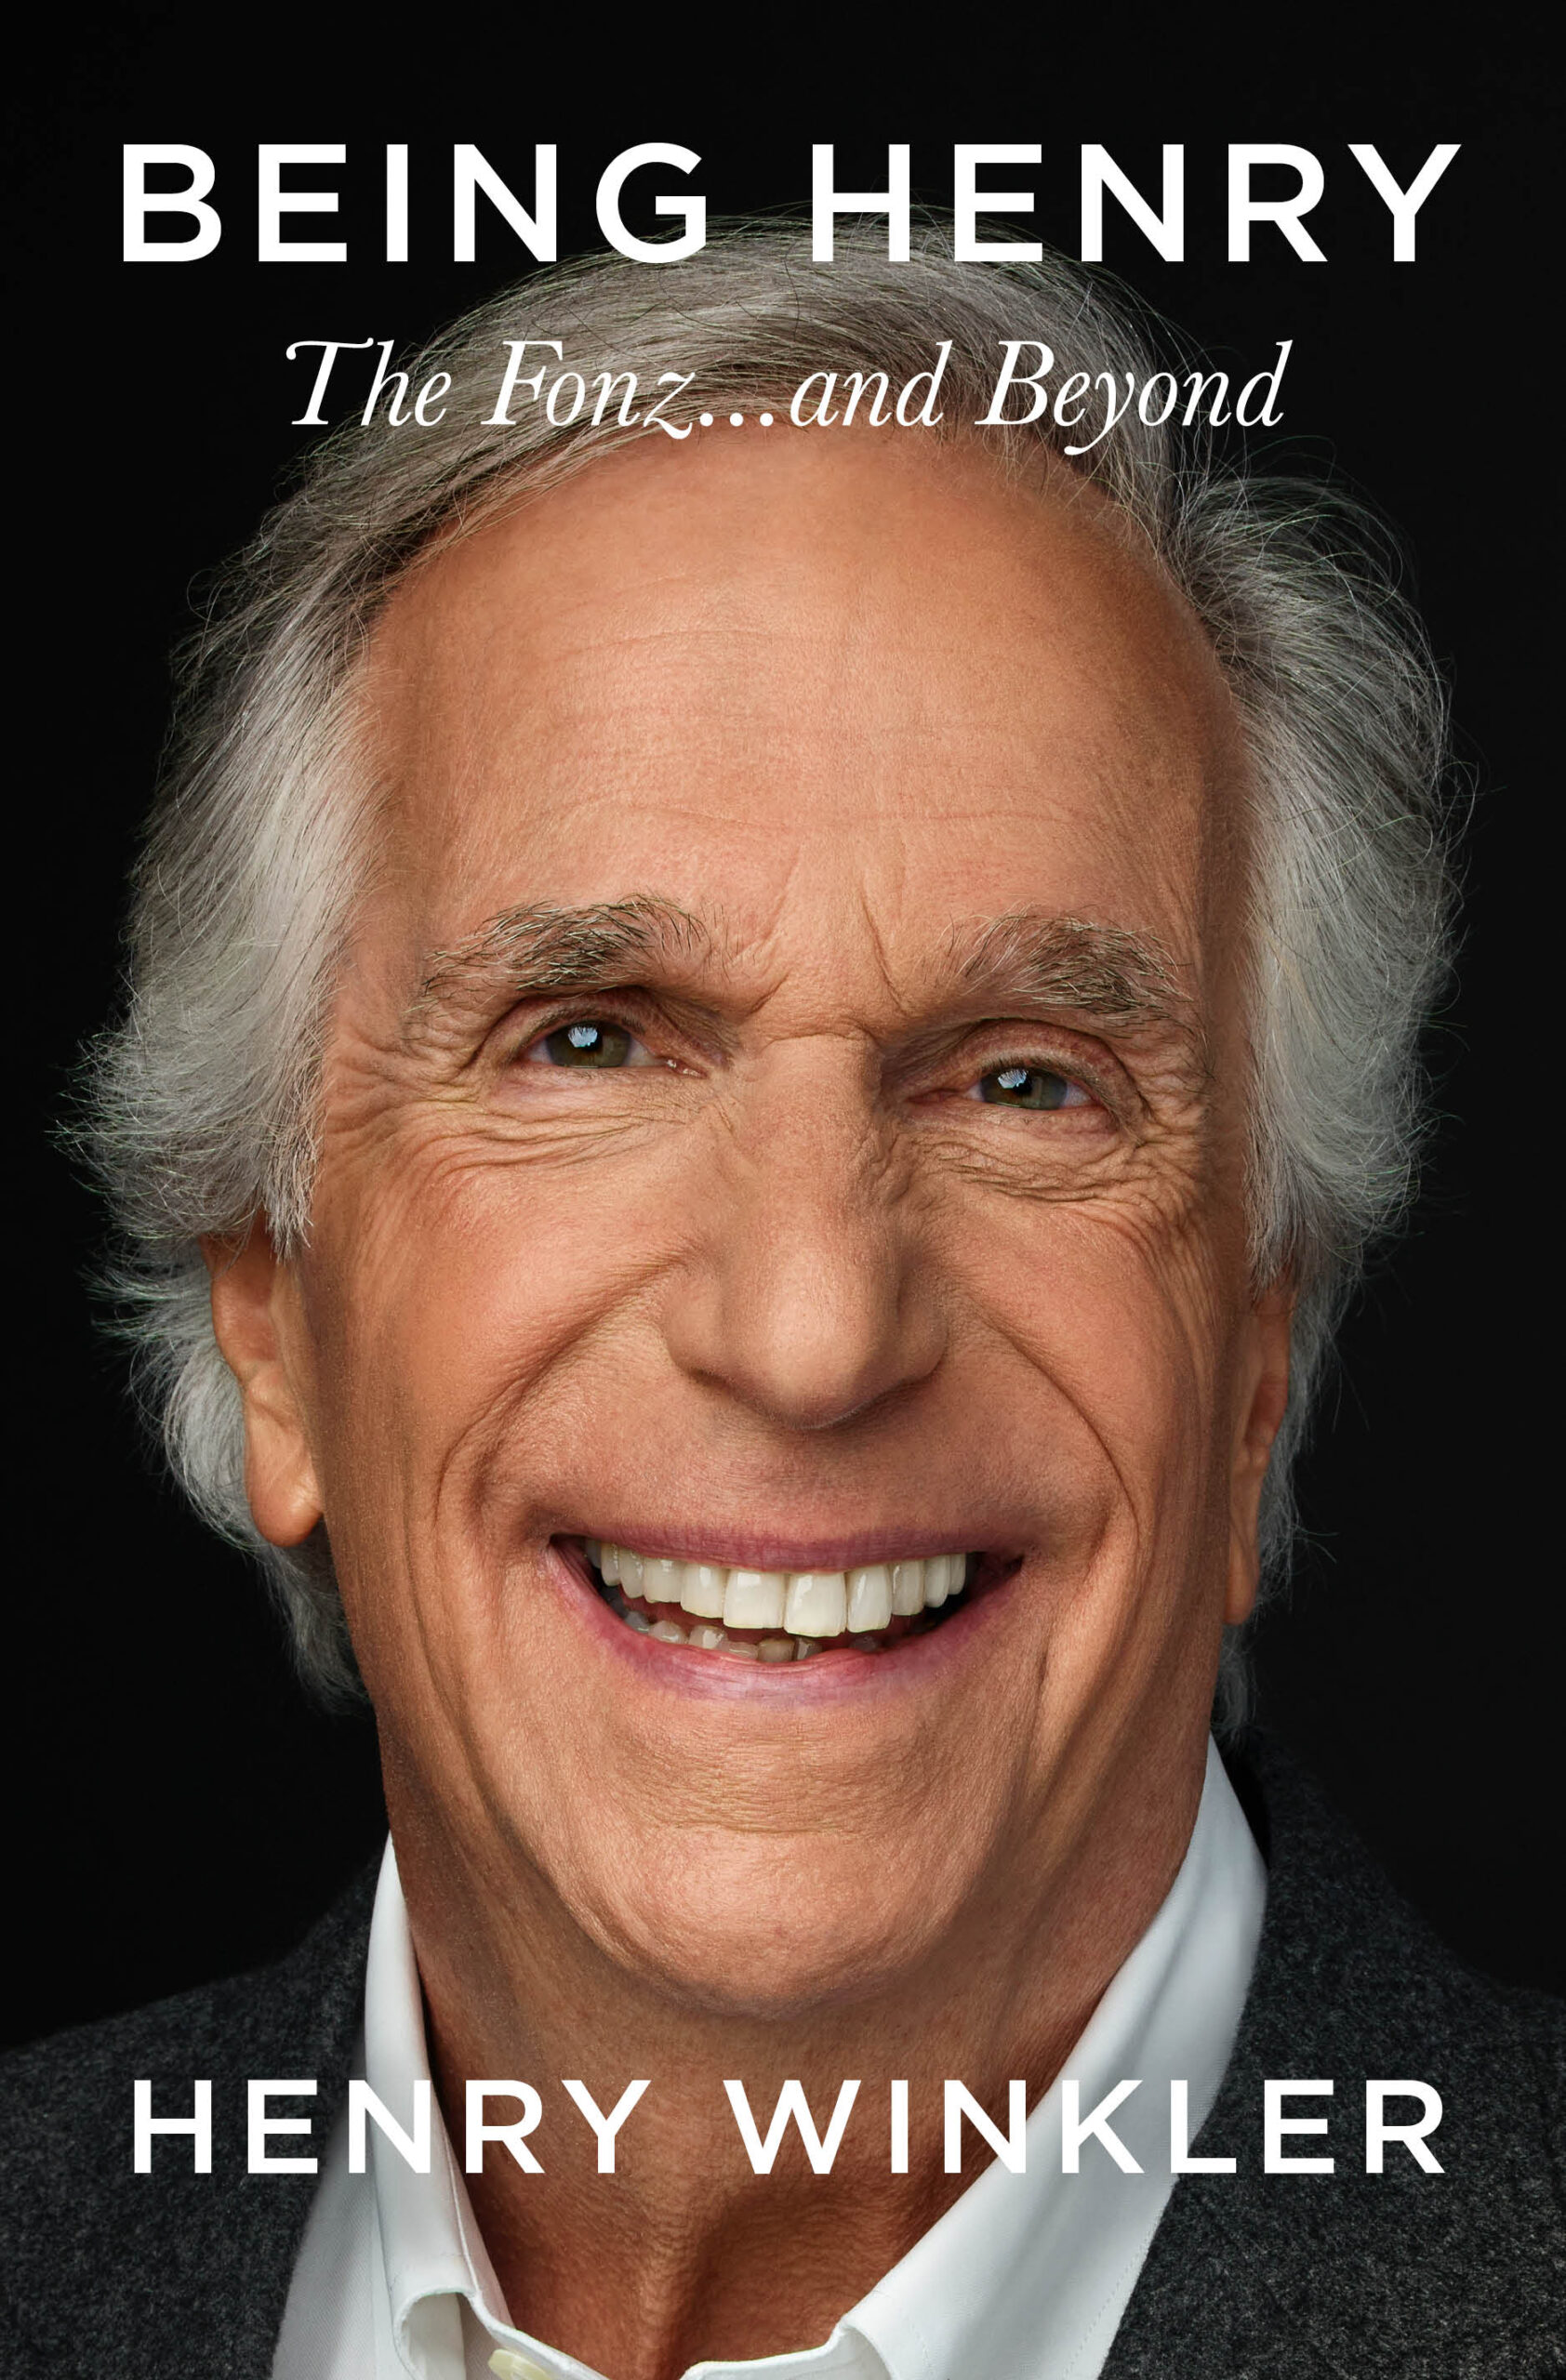 Actor and author Henry Winkler